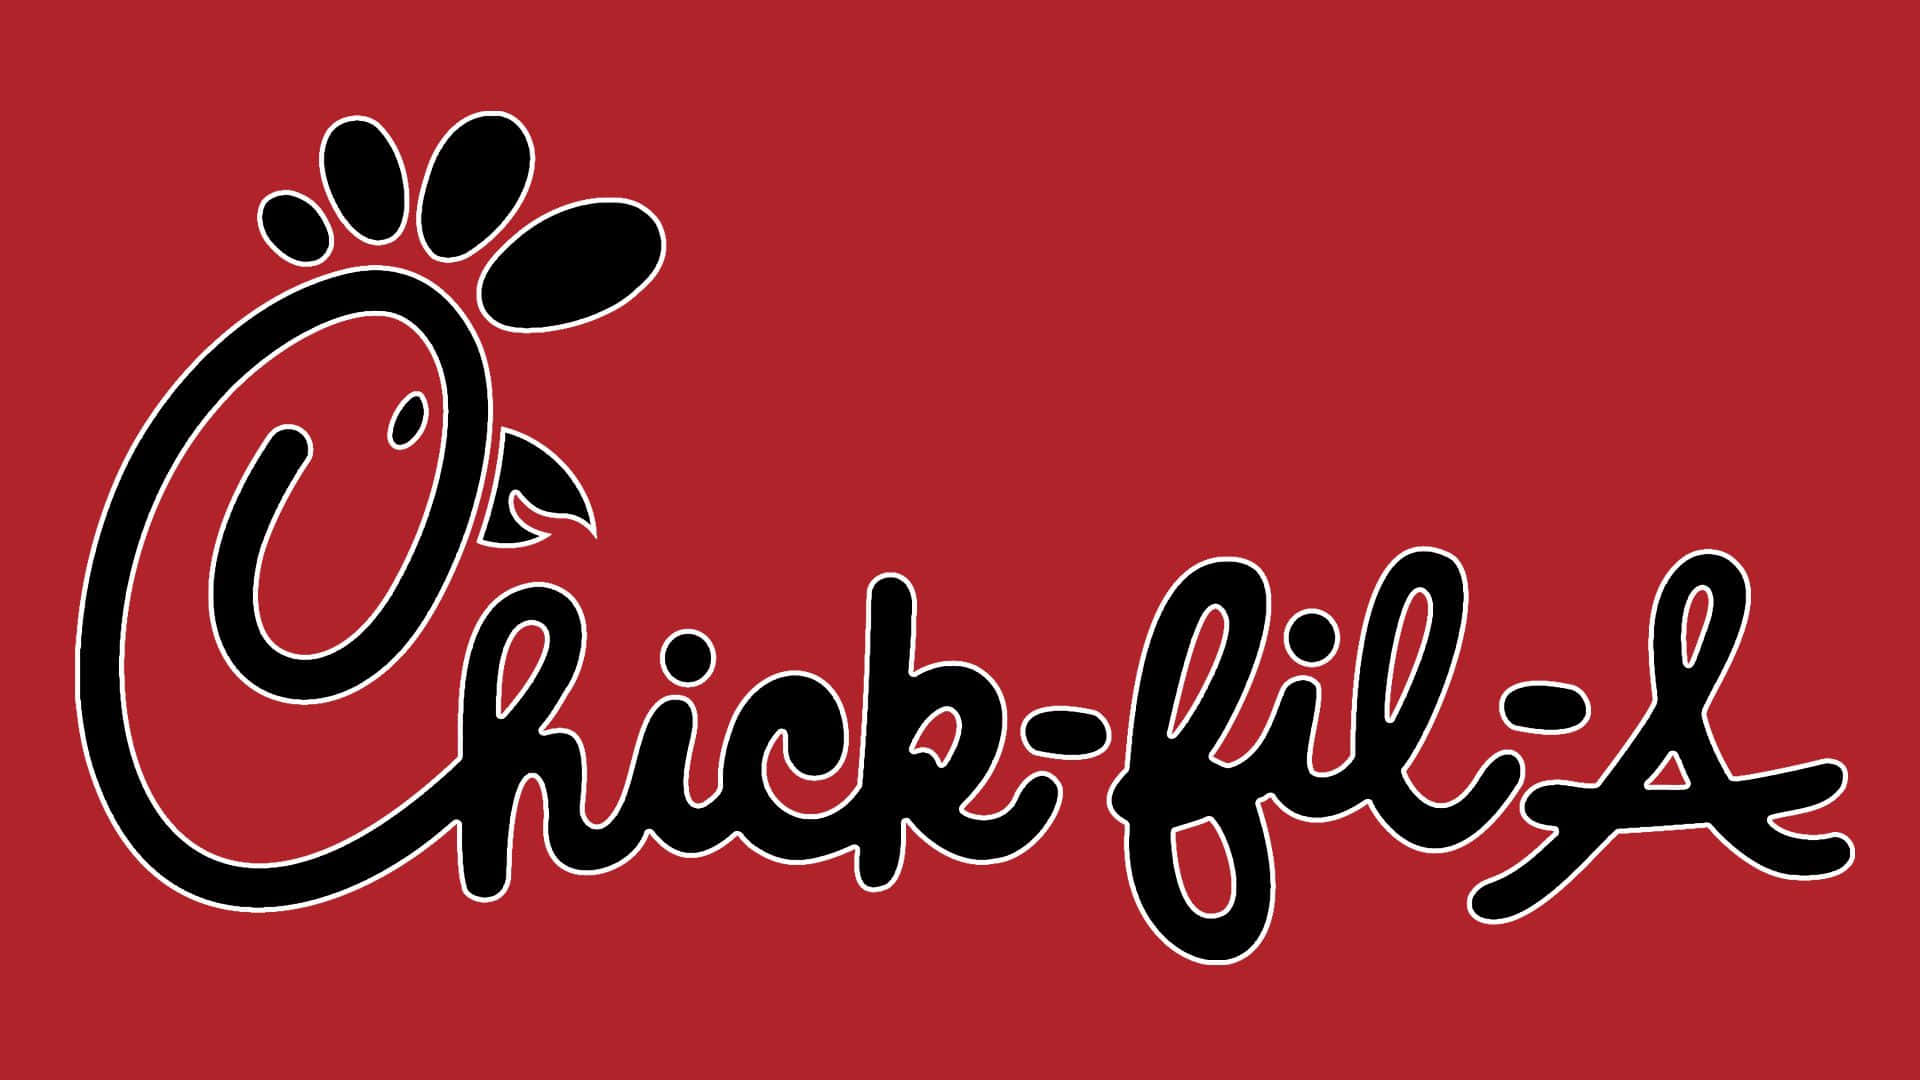 Chick Fil A Logo On A Red Background